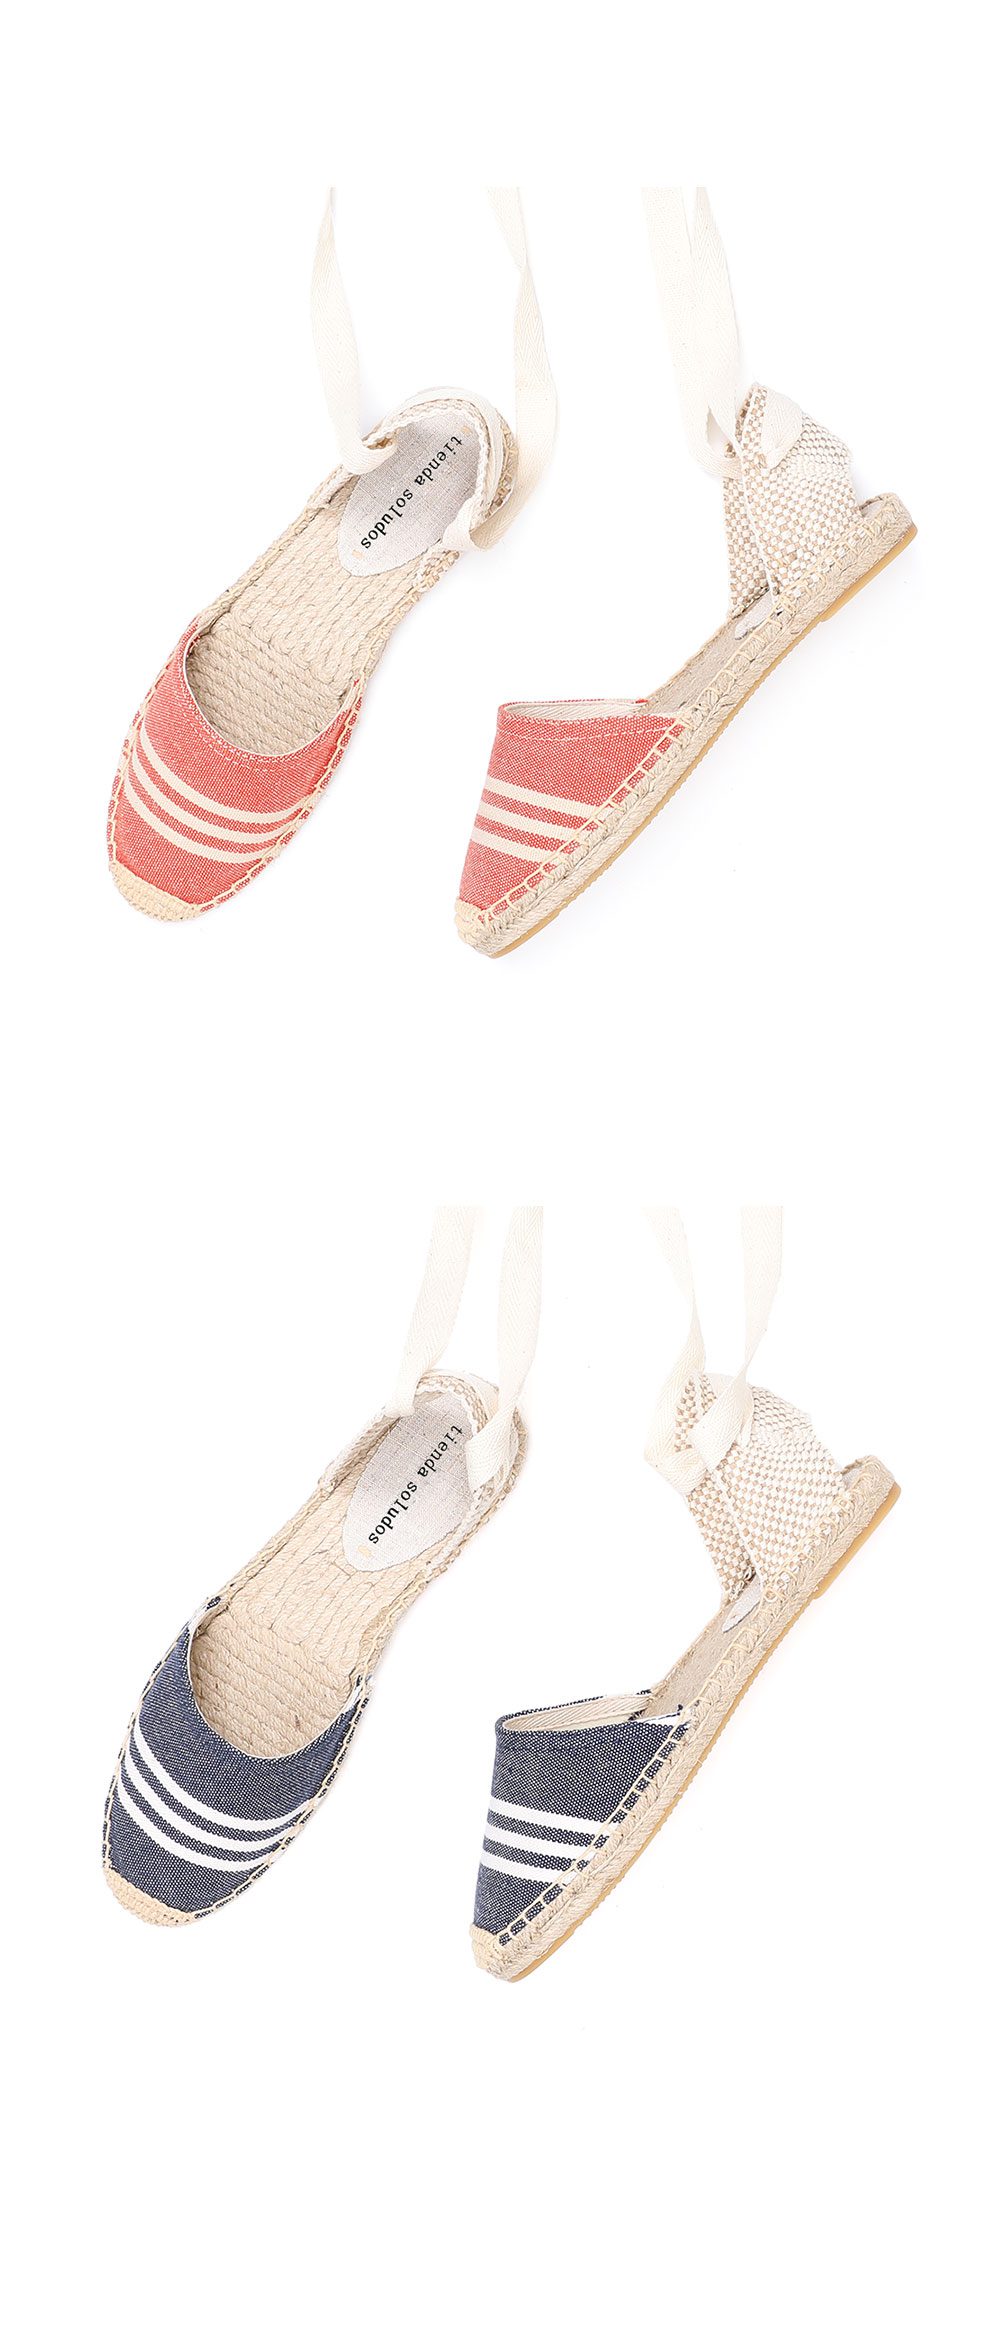 2021 Casual Sandals Selling Real Hemp T-strap Flat With Open Sapato Feminino Sapatos Mulher Womens Espadrilles Shoes